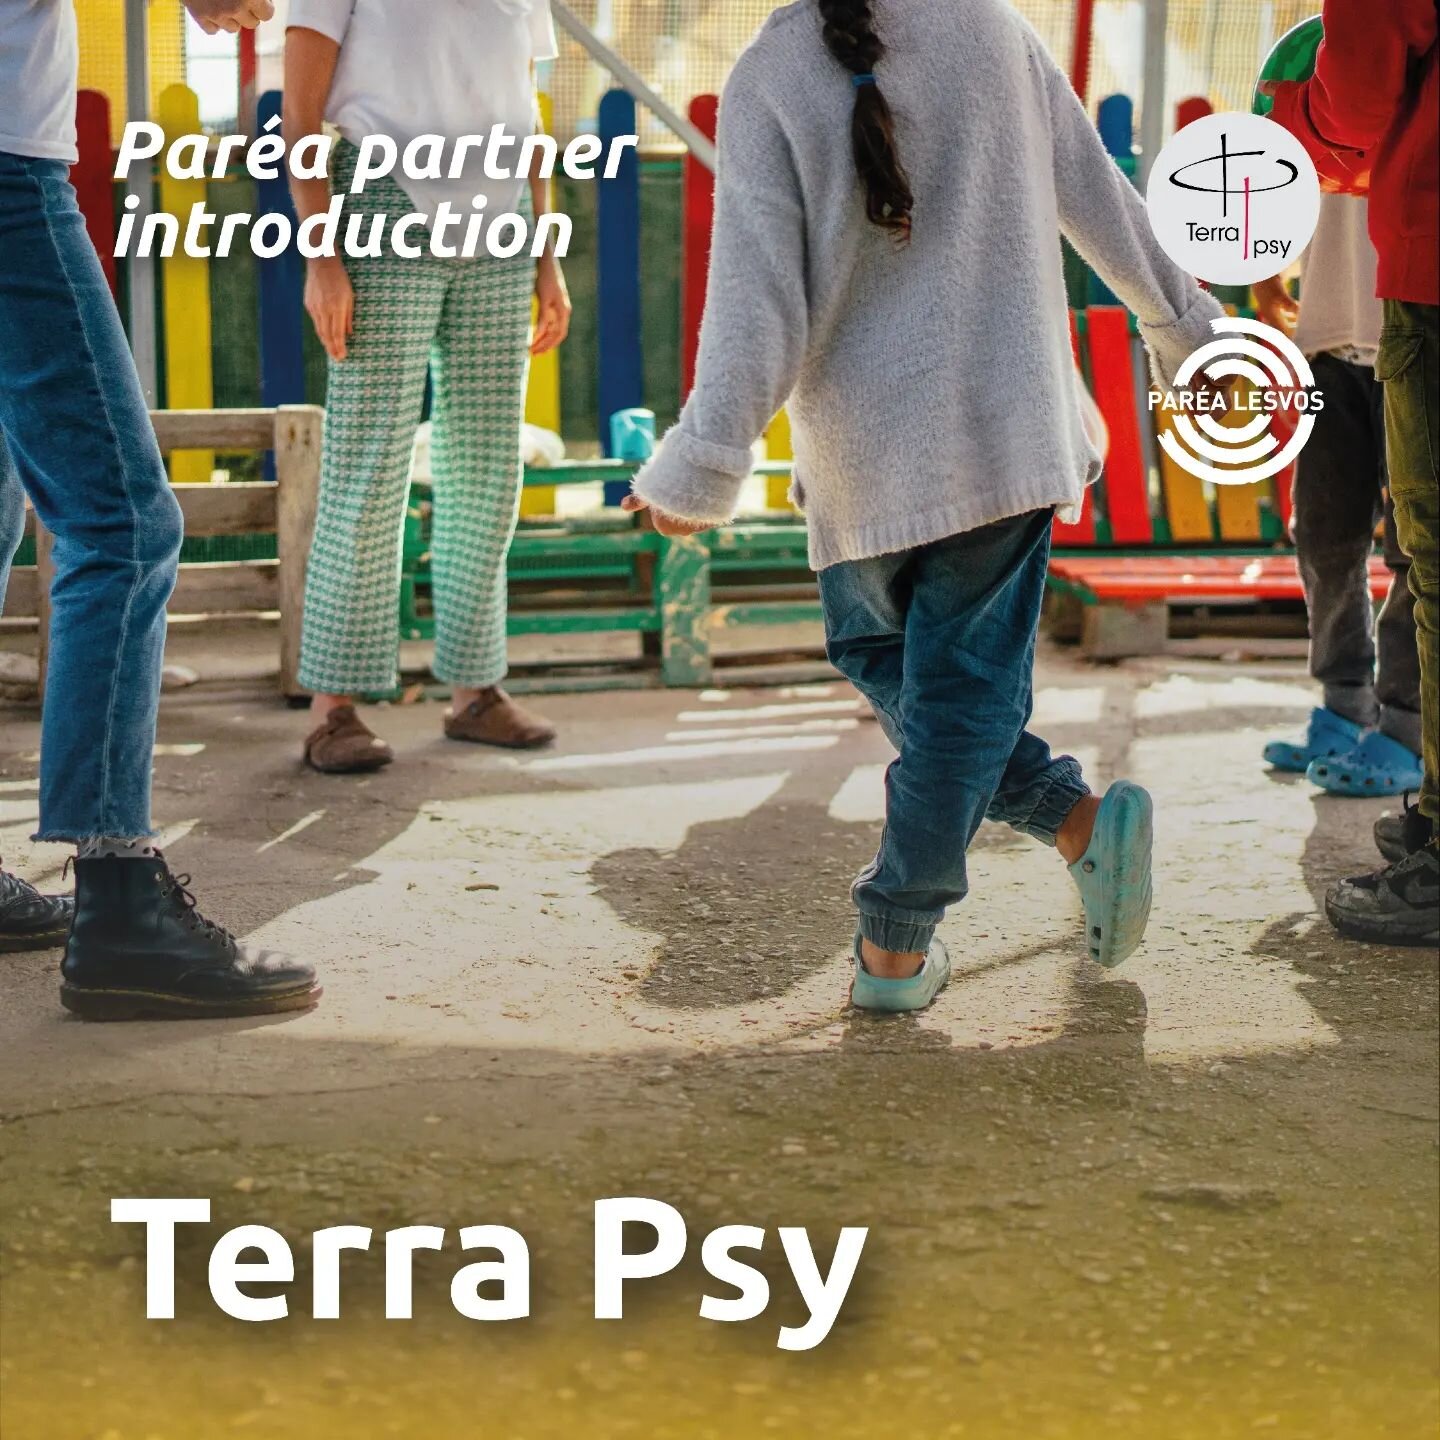 🤝🏽 Today we are going to introduce you one of our precious partners who has recently joined us in Par&eacute;a Lesvos: Terra Psy&nbsp;@terra_psy_

During this first month with us, they contributed significantly to our center, setting up an MHPSS cl